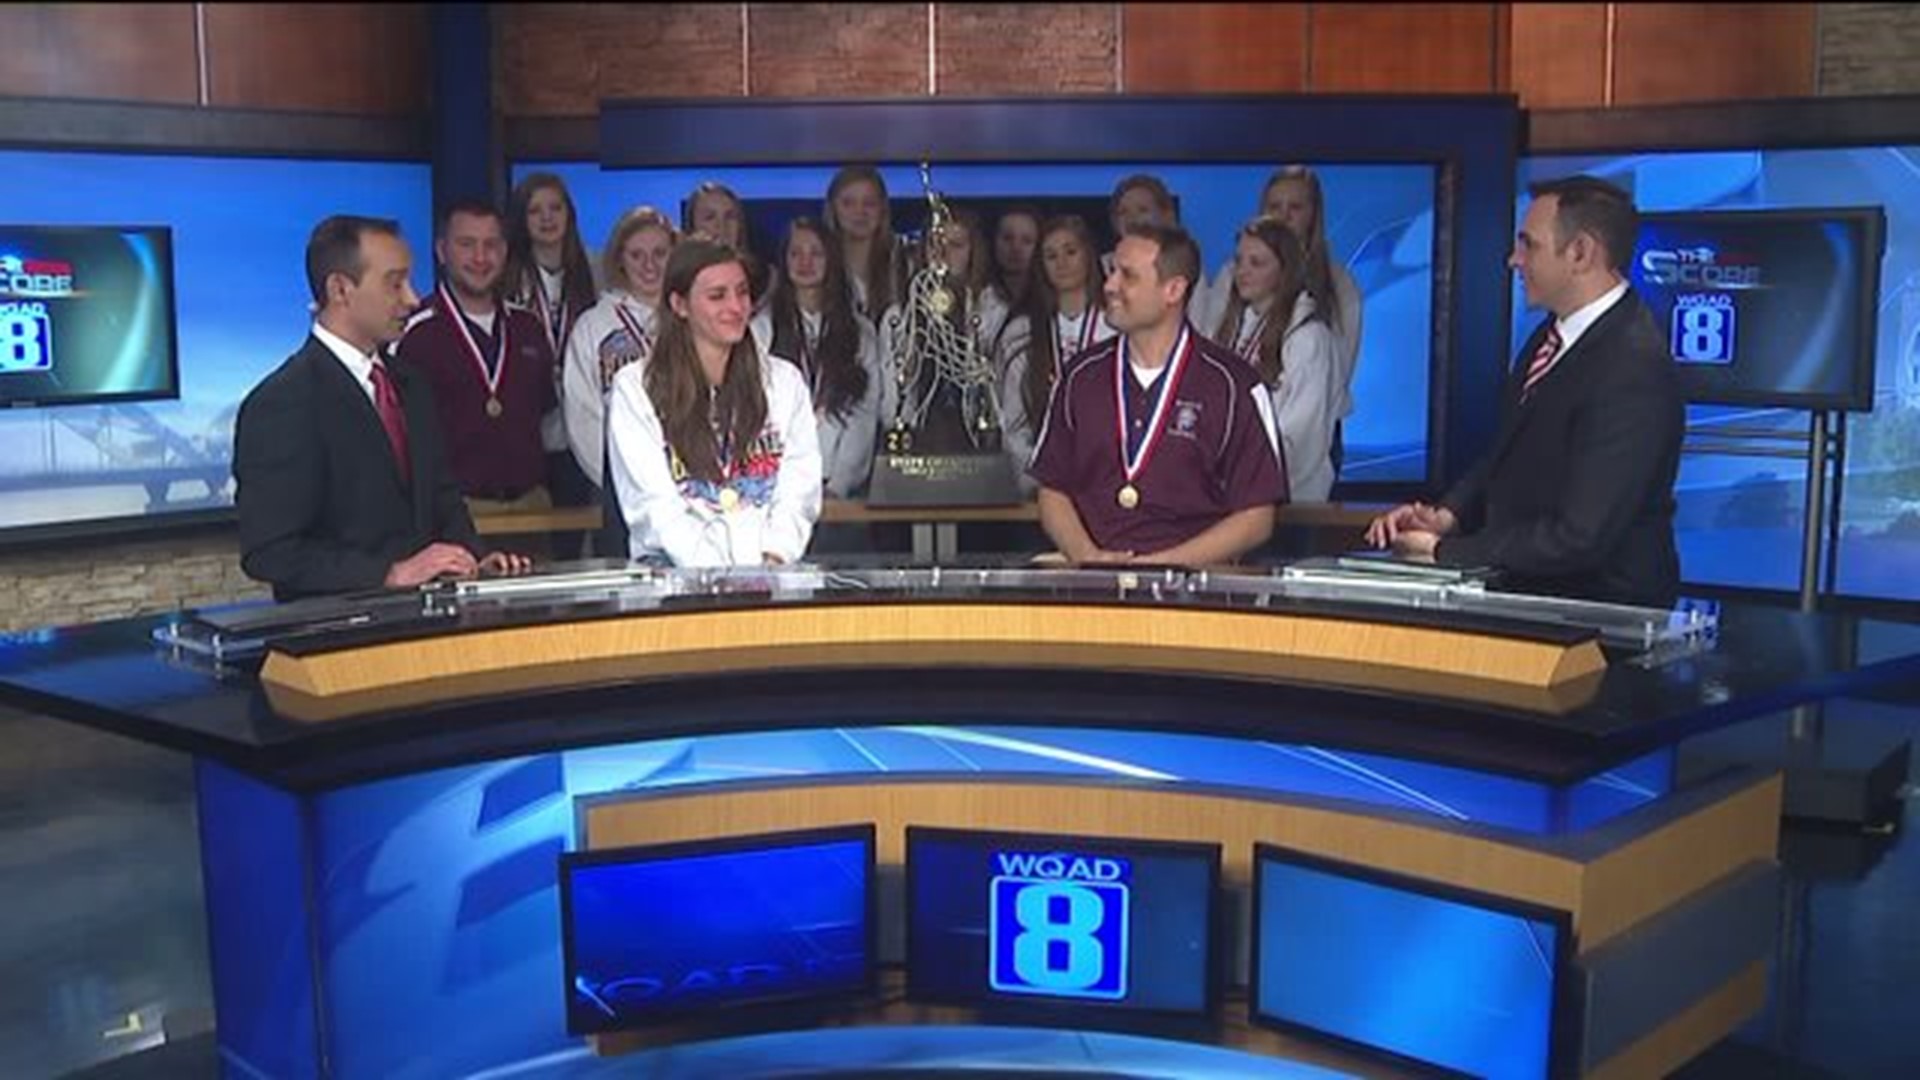 THE SCORE SUNDAY - Annawan State Champs